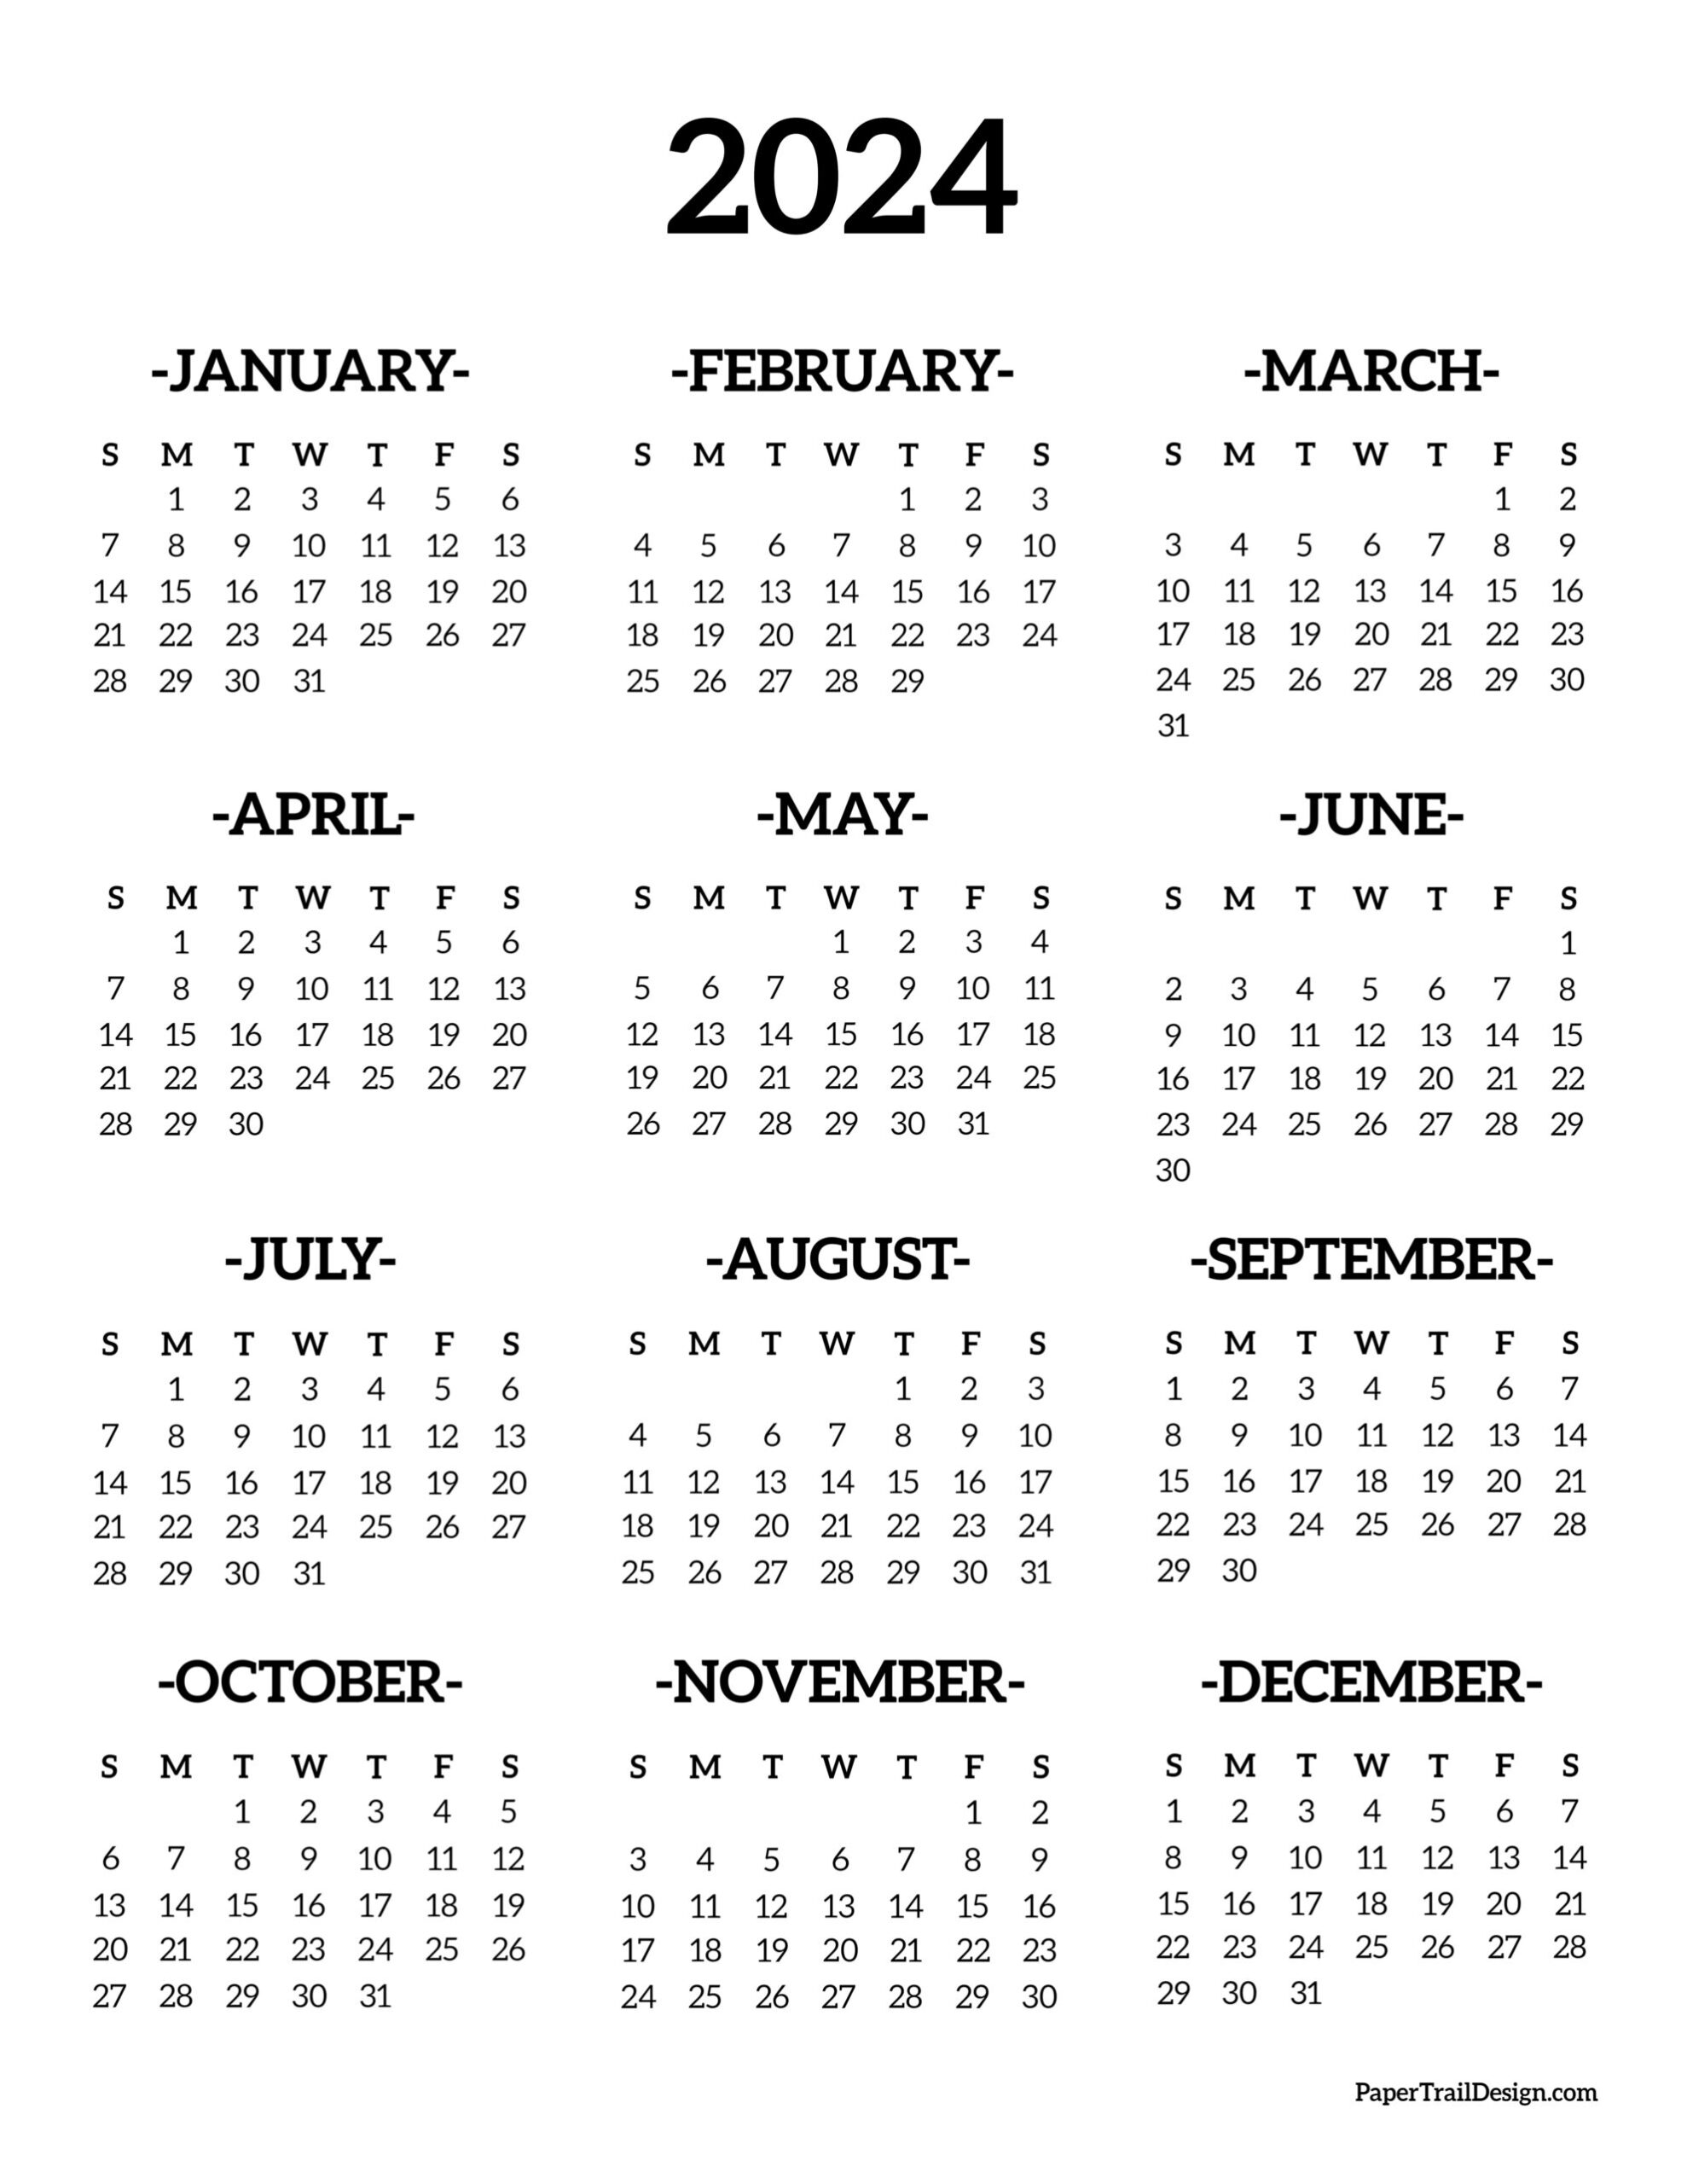 Calendar 2024 Printable One Page - Paper Trail Design for Full Year Calendar Printable 2024